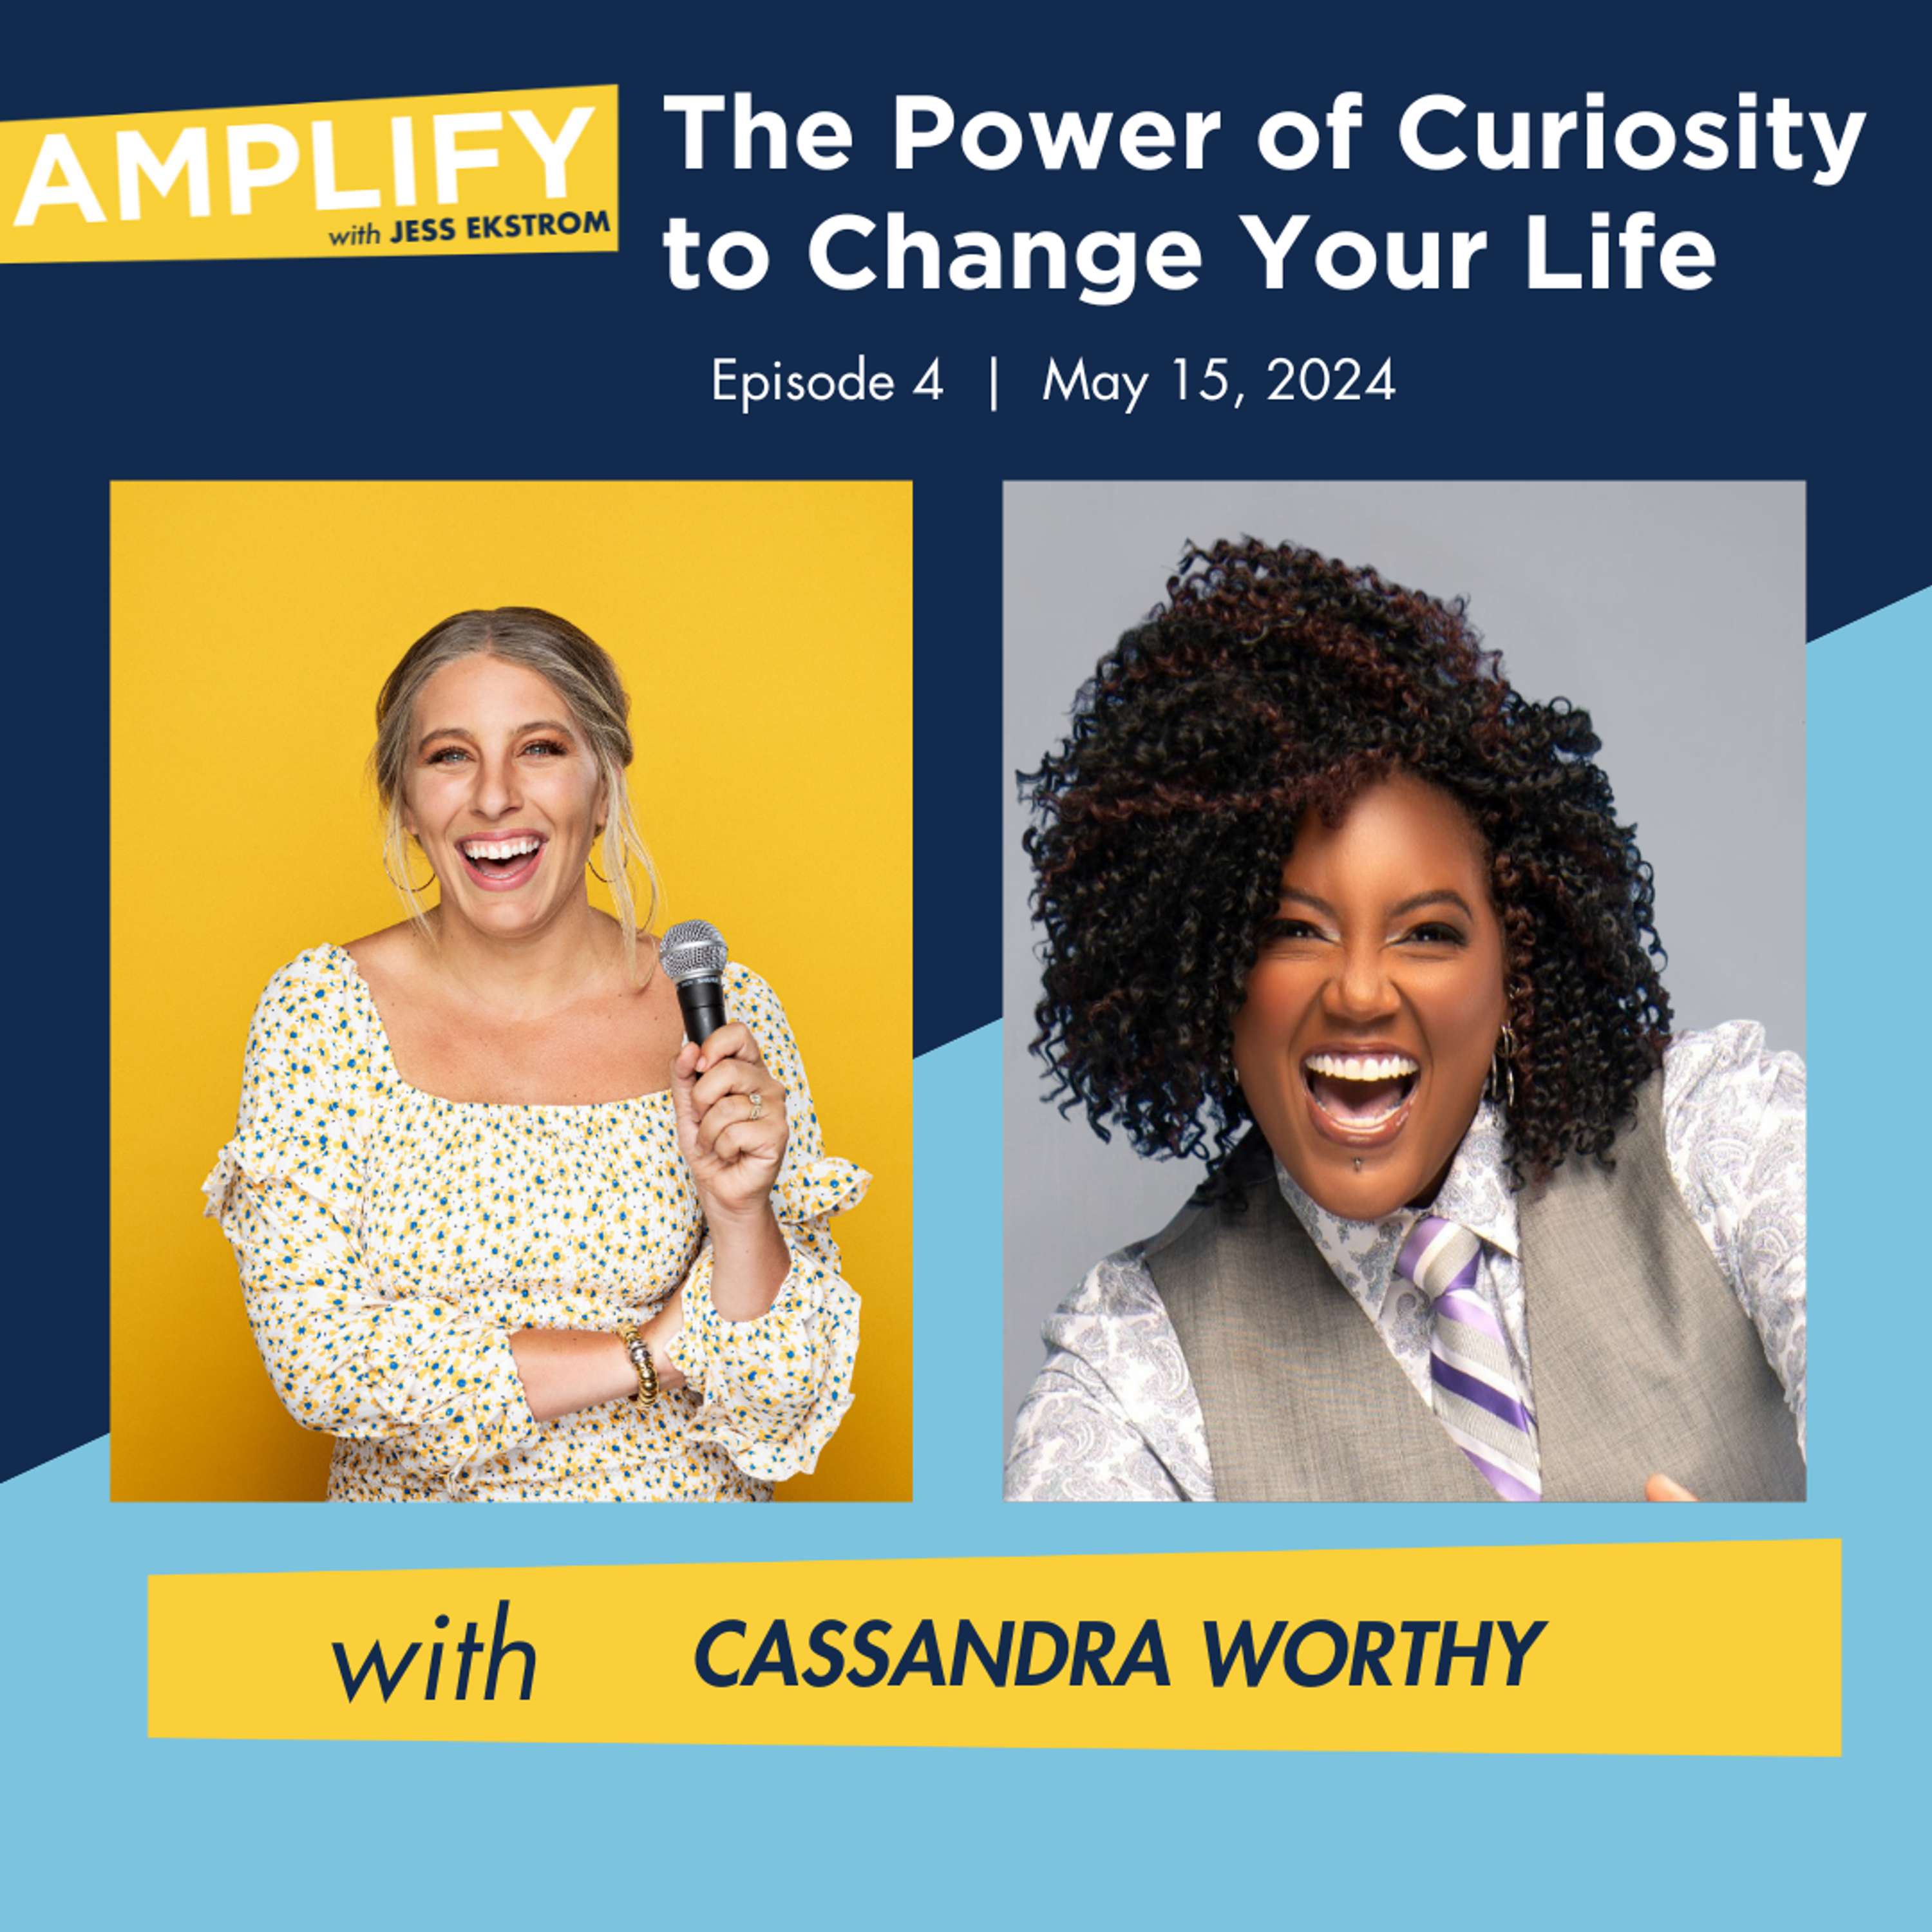 How to Change Your Life with Top-Rated Speaker Cassandra Worthy